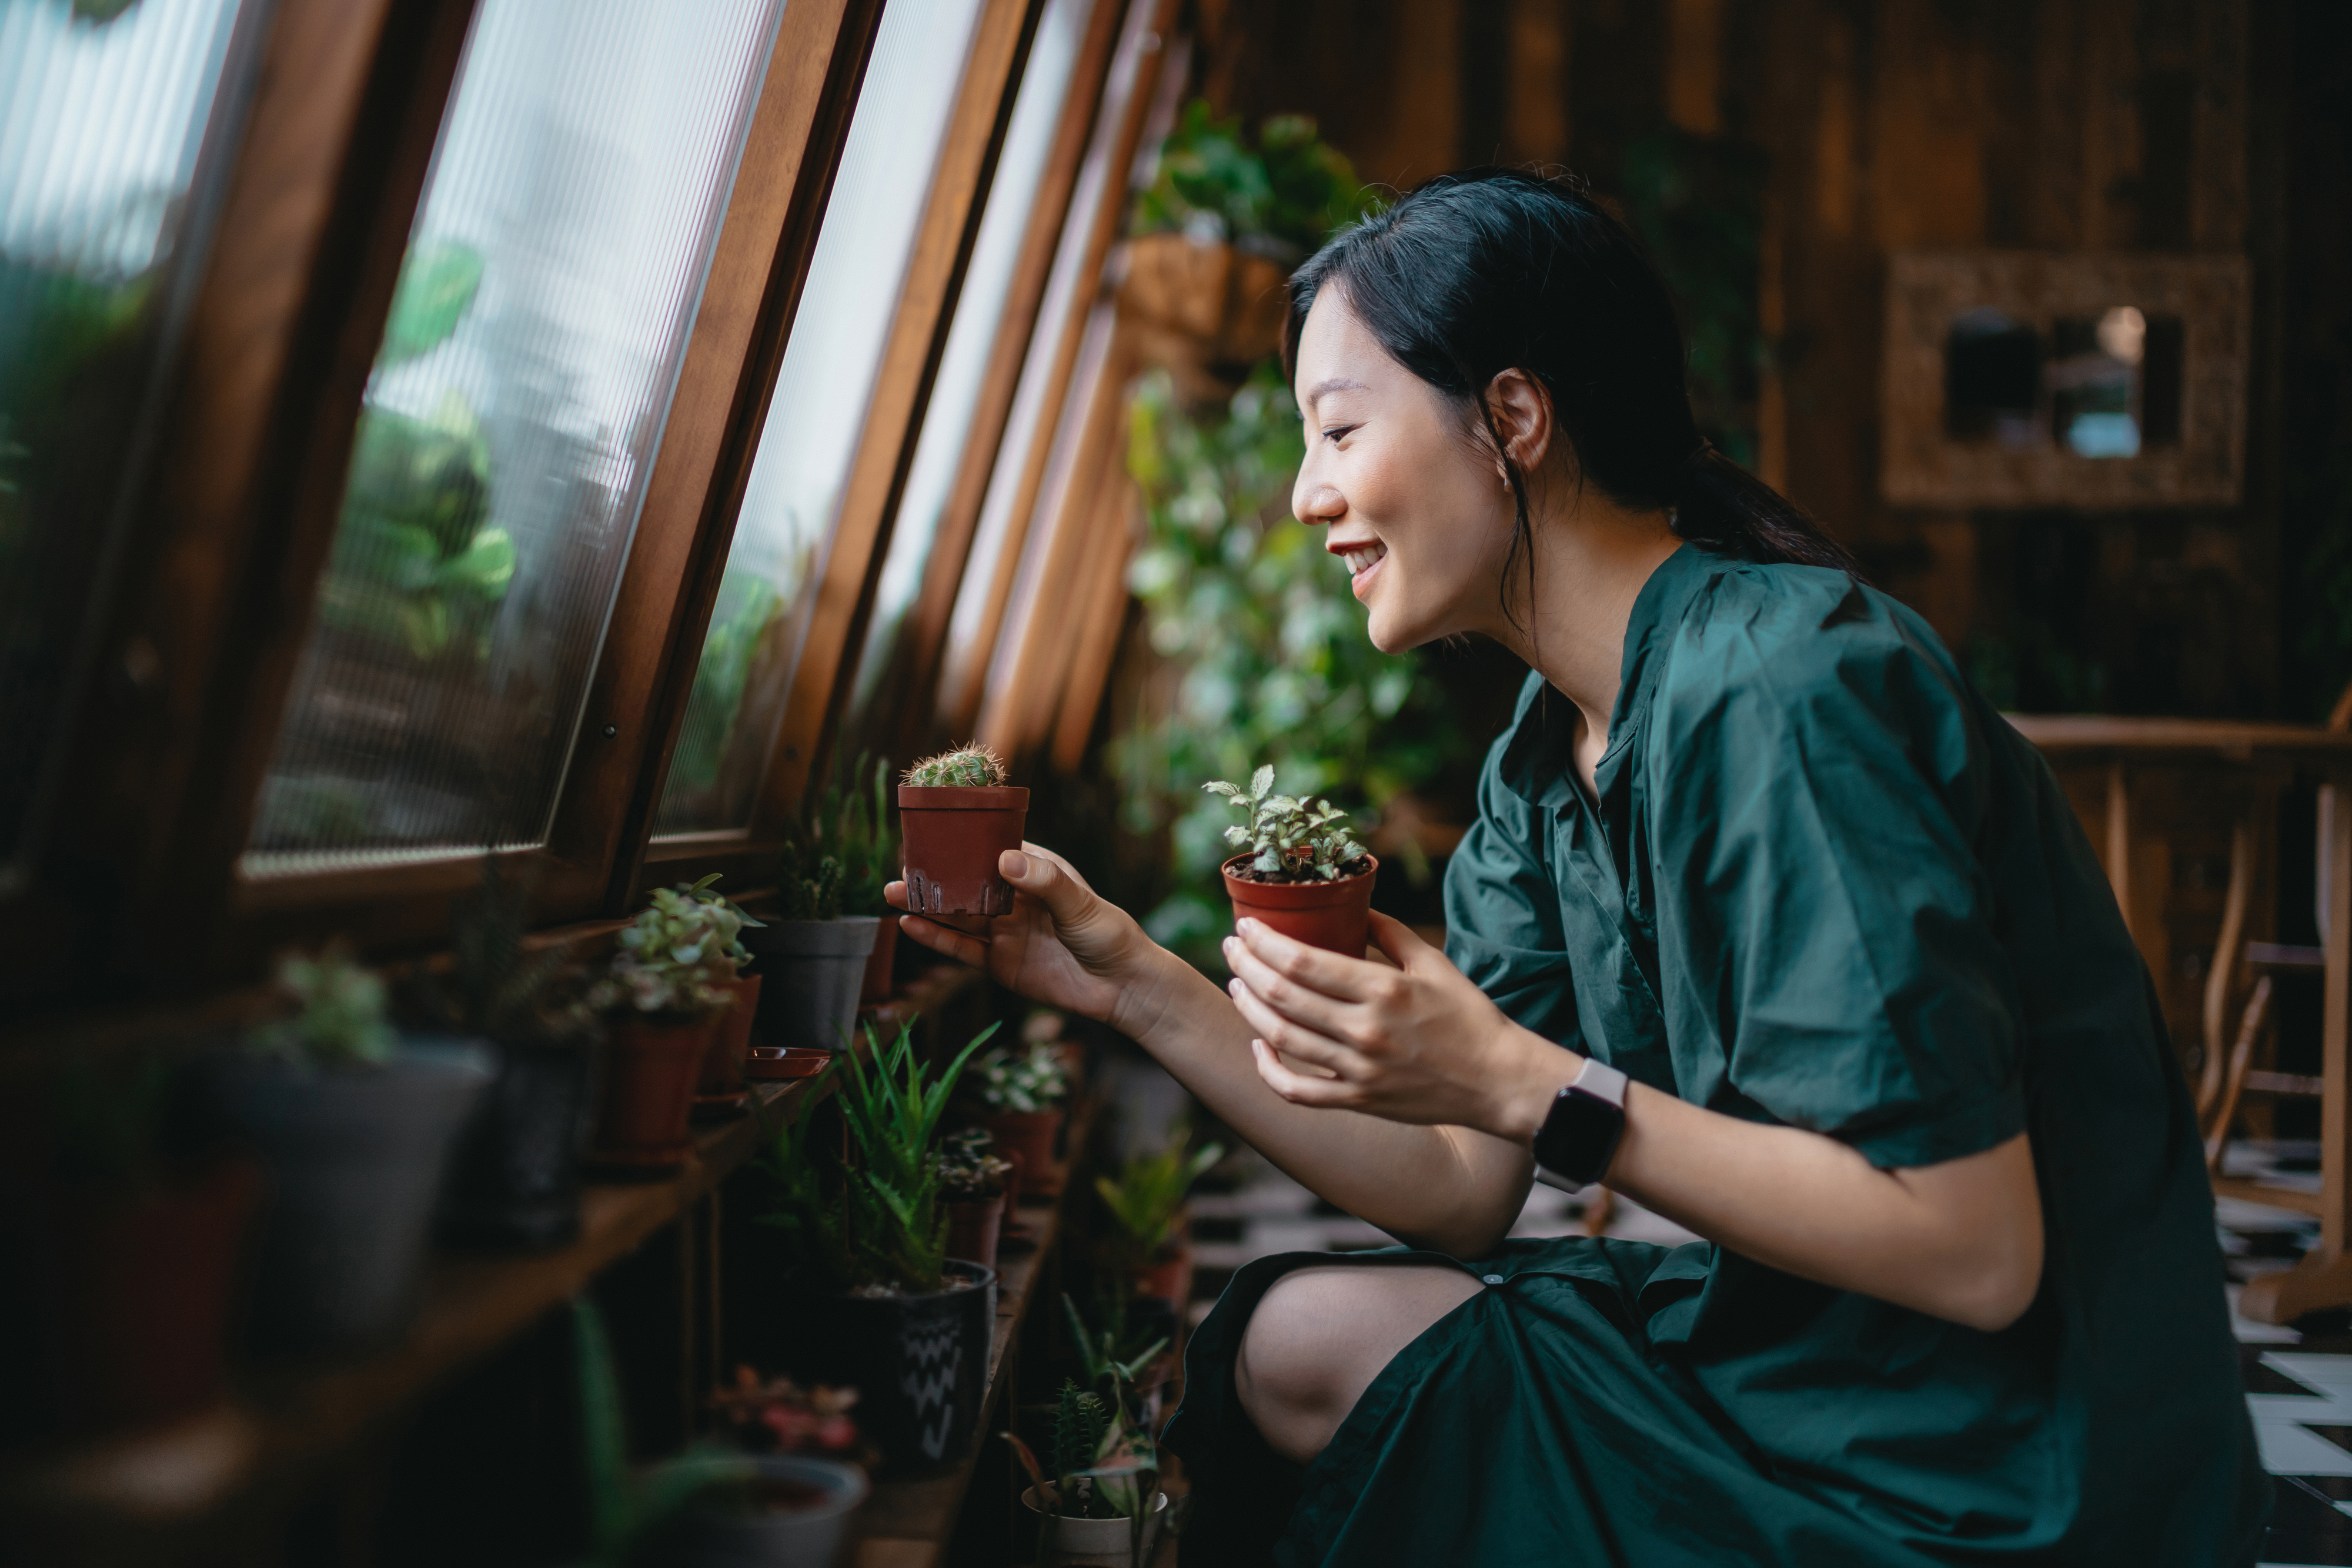 A woman in a green dress, holding small potted plants, smiles as she looks out a window surrounded by greenery